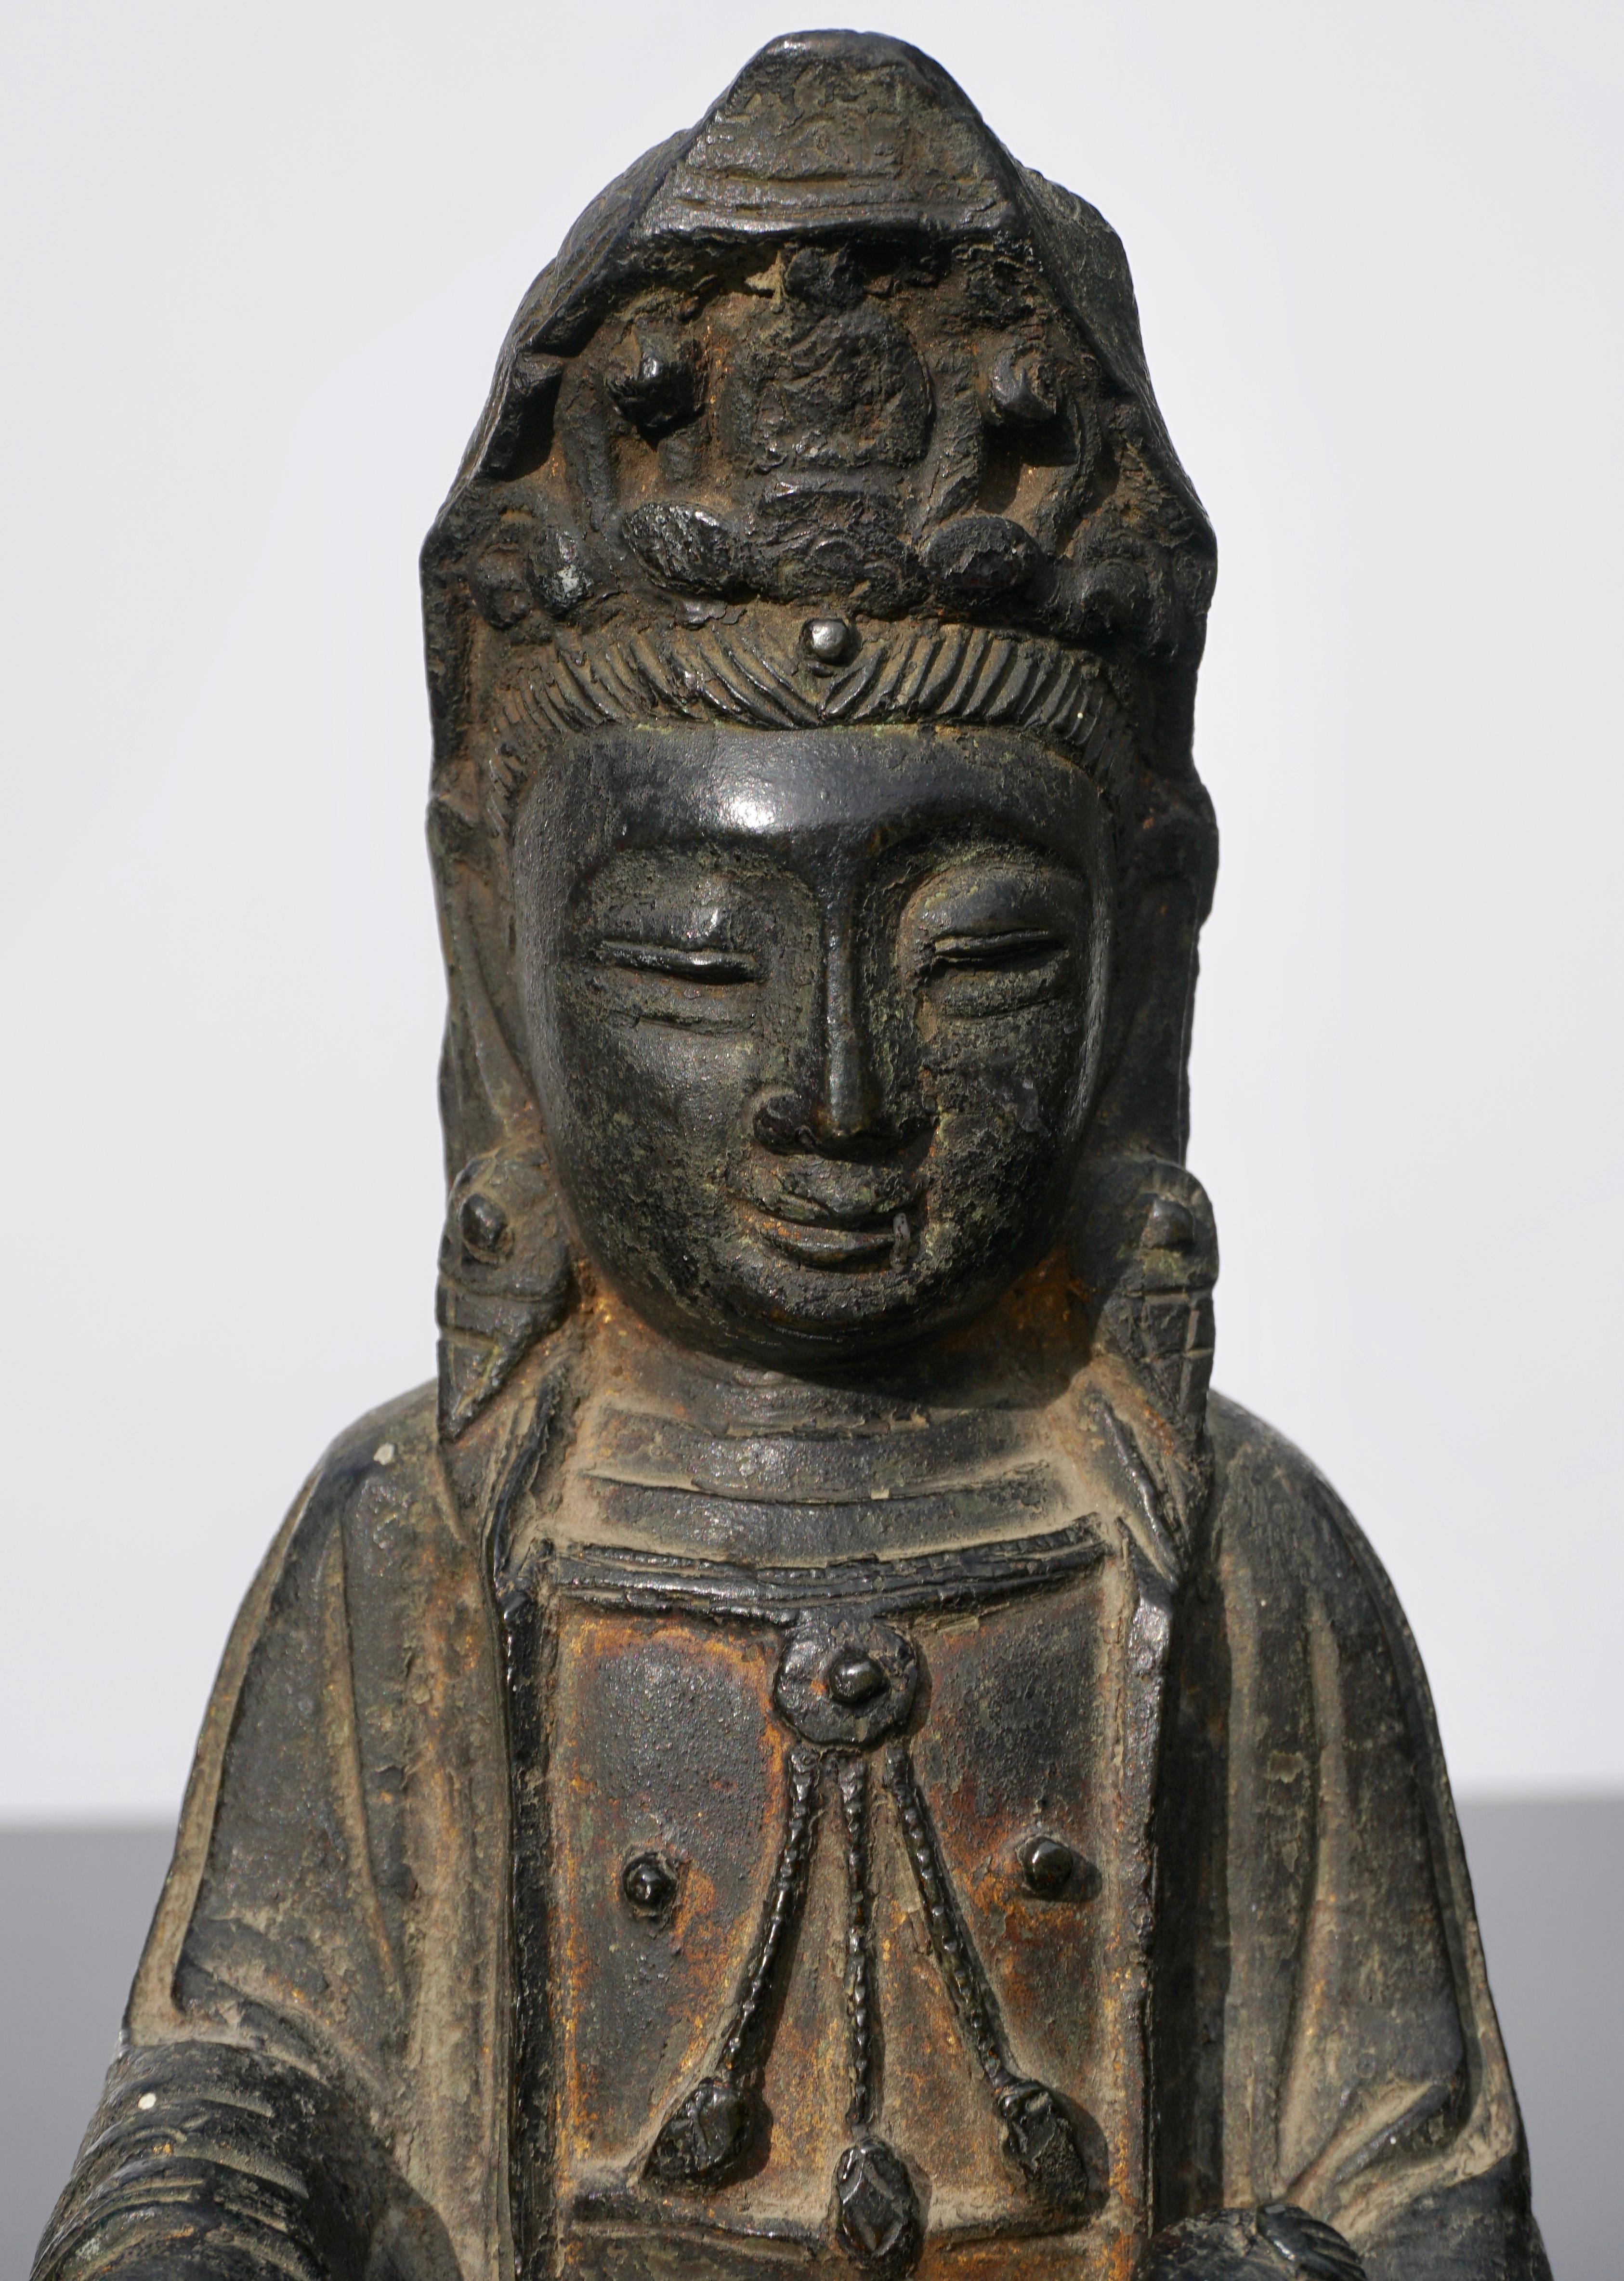 A early Ming dynasty lacquered bronze statue of the feminine Buddha figure; Guanyin with child, circa 15th-16th century China.

The Buddha cast seated with the right leg raised and a child supported on the left lap, wearing a loose fitting robe